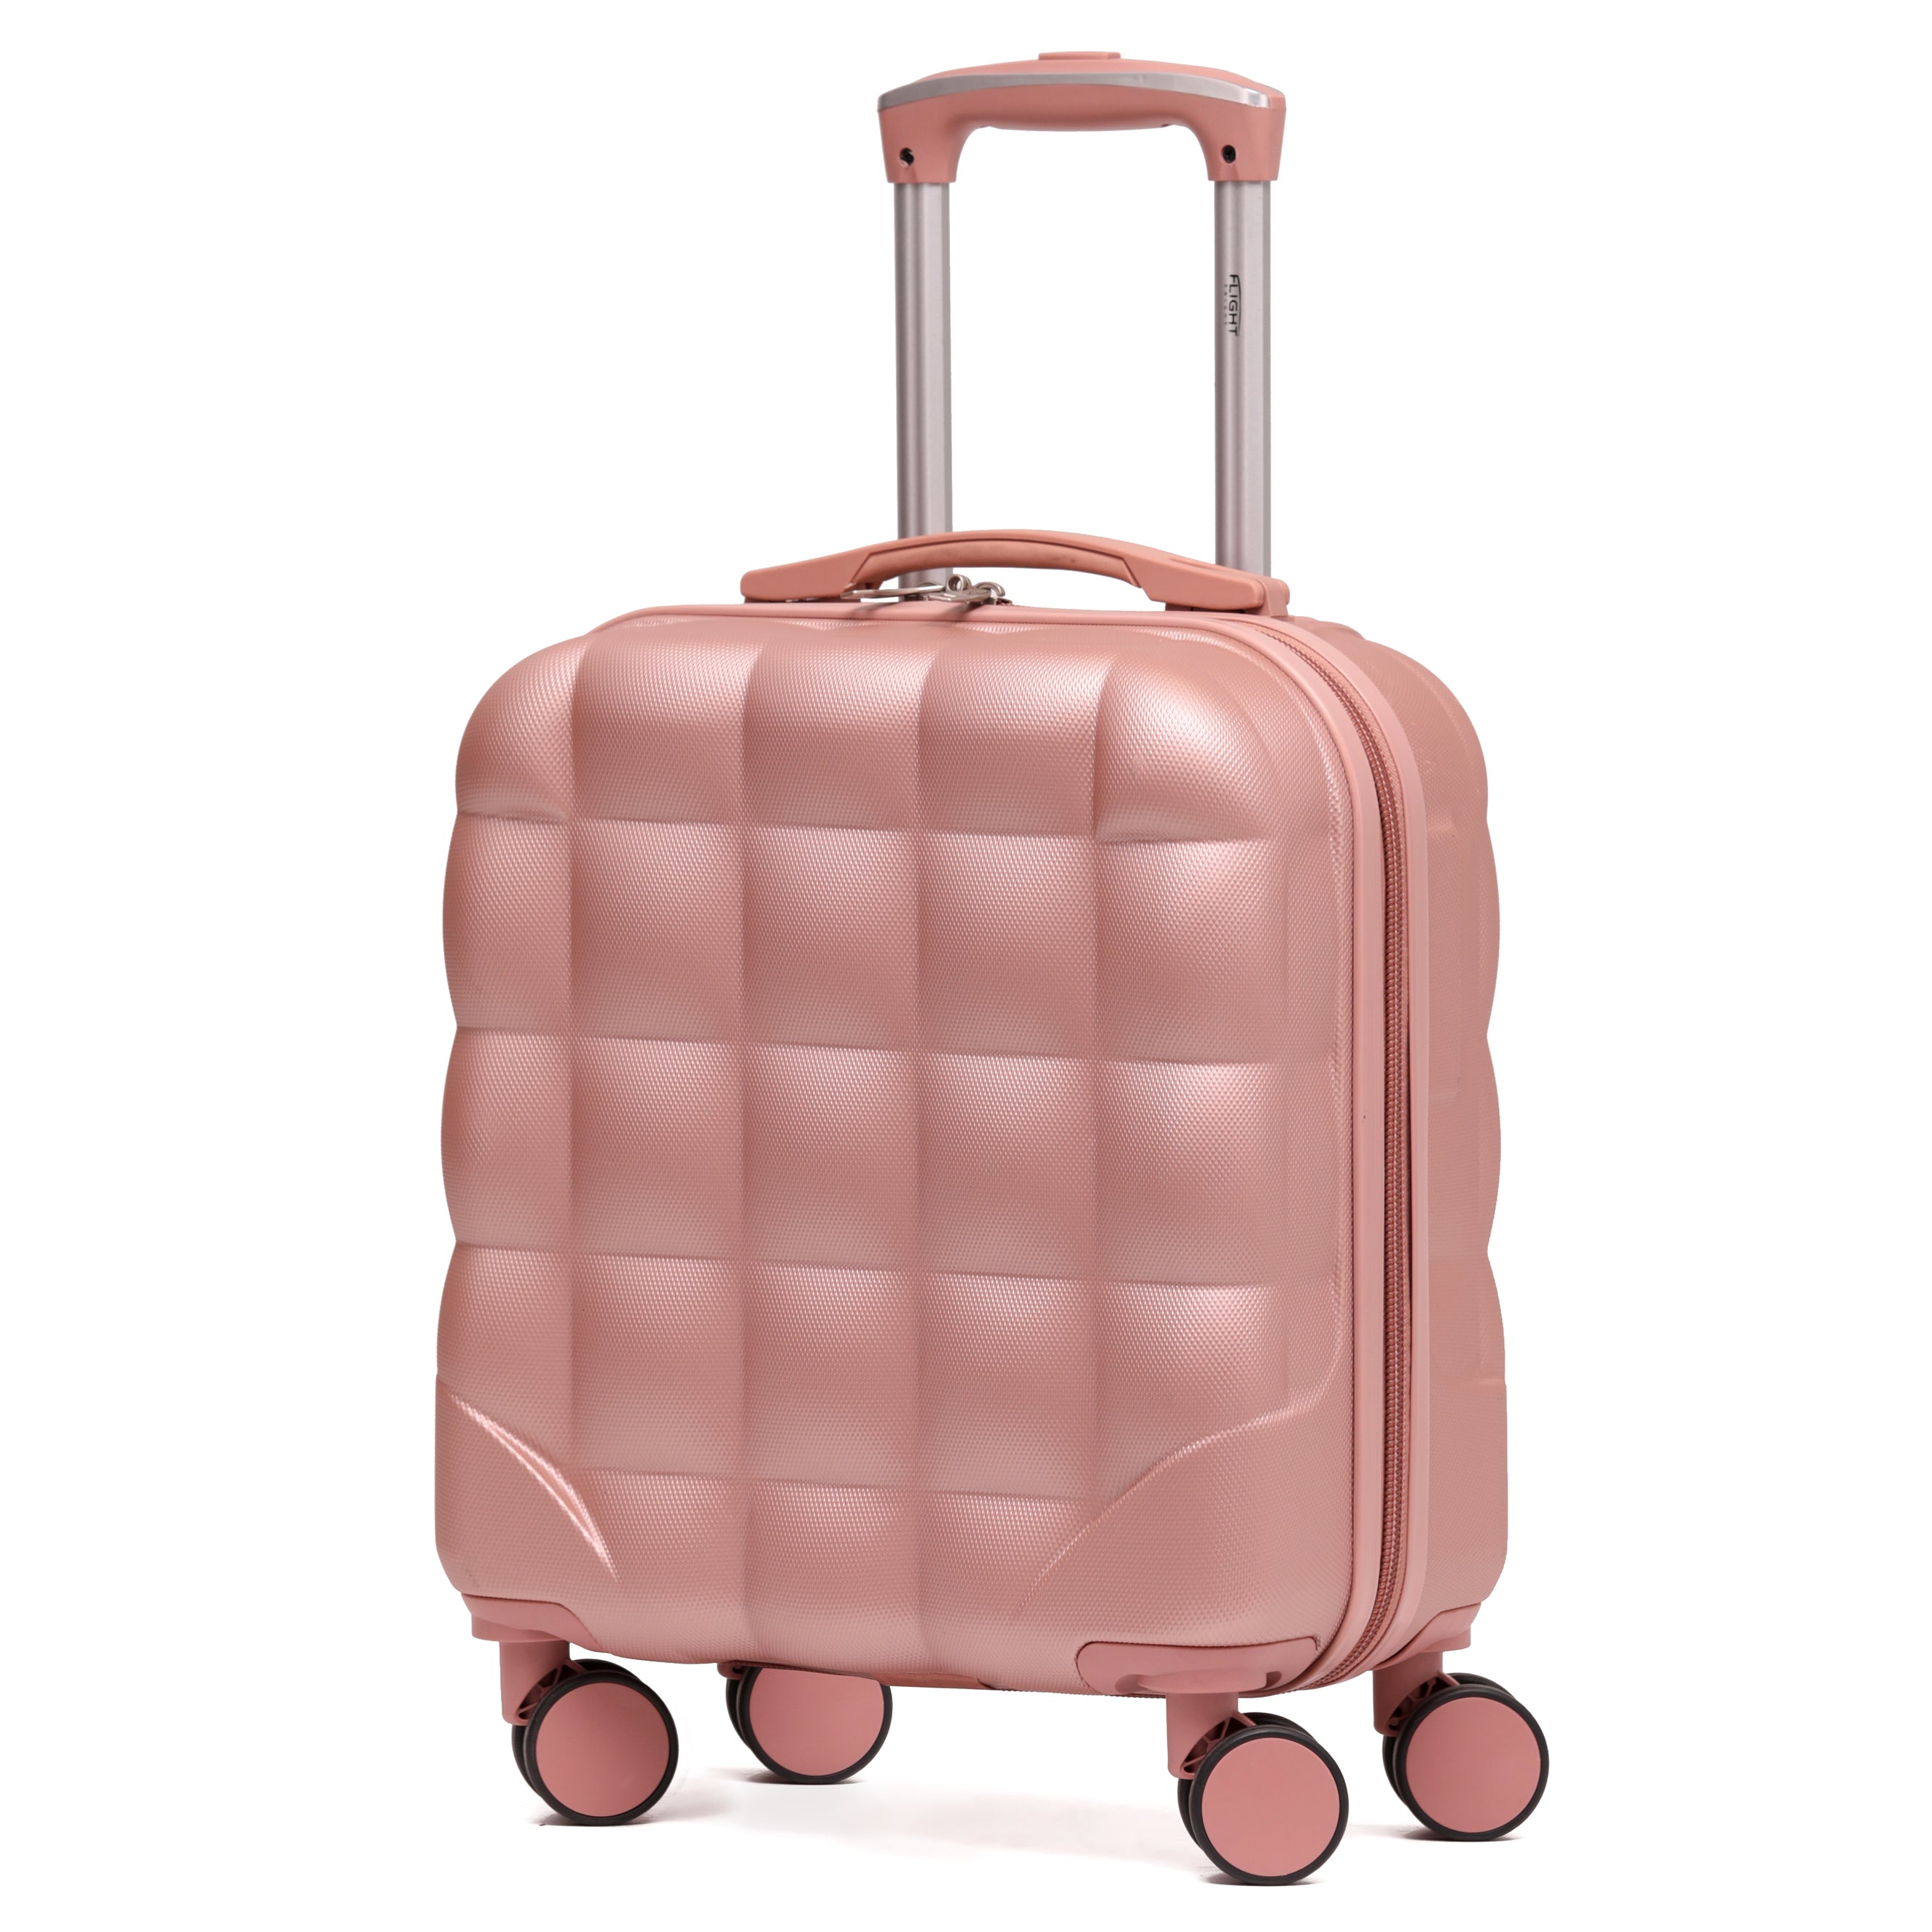 Load image into Gallery viewer, 45x36x20cm Bubble Cabin Case Set Ryanair Easyjet Approved Carryon Cabin Suitcase
